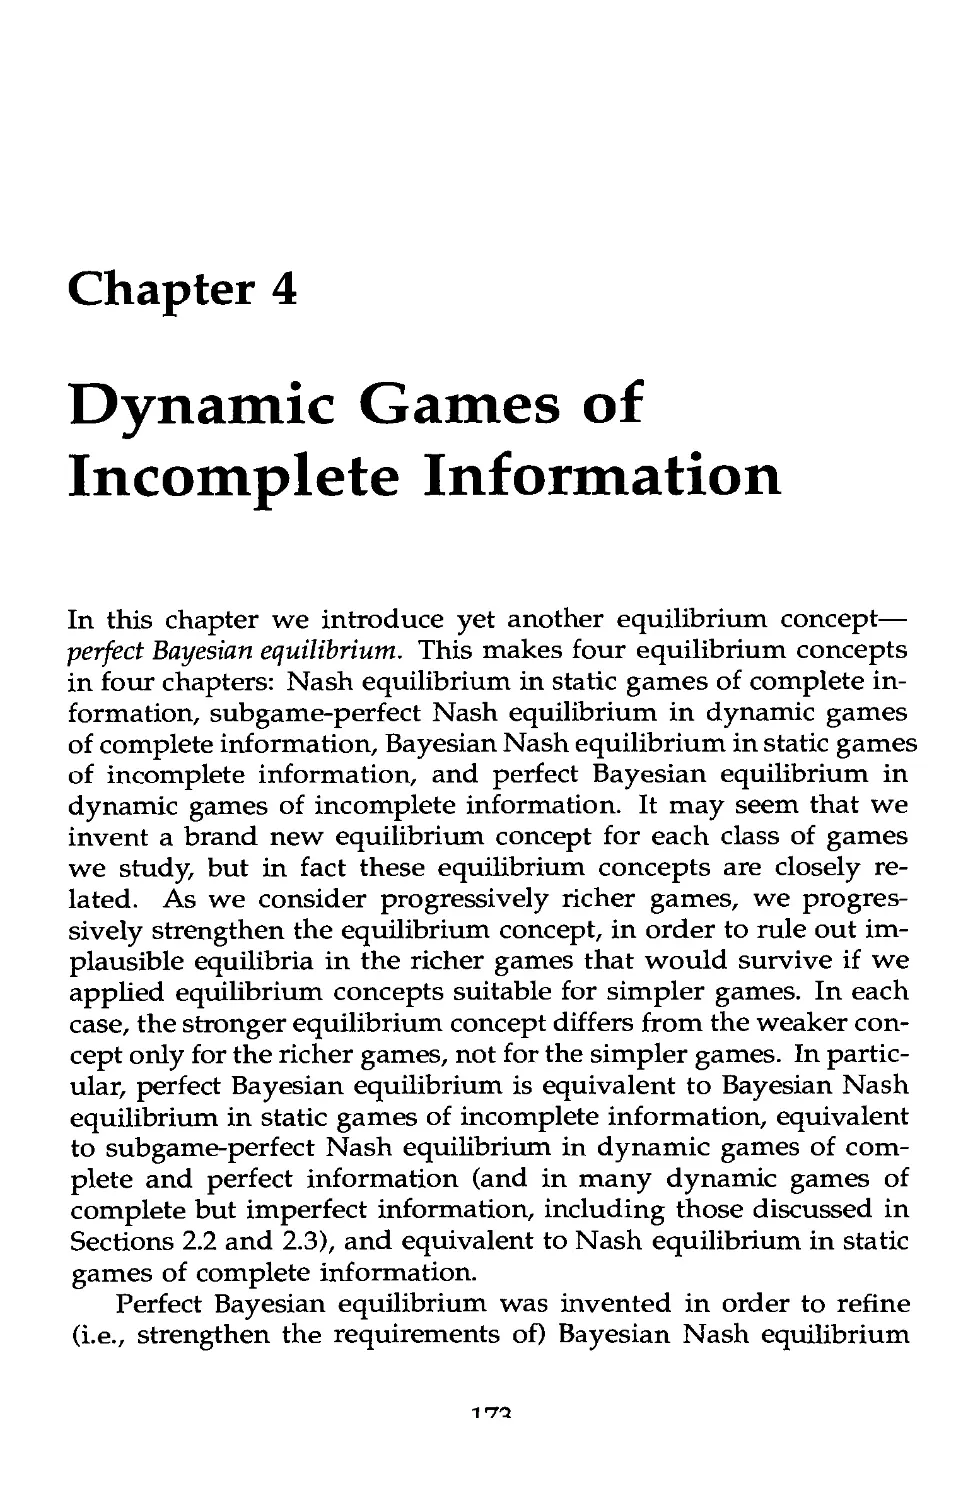 4 Dynamic Games of Incomplete Information